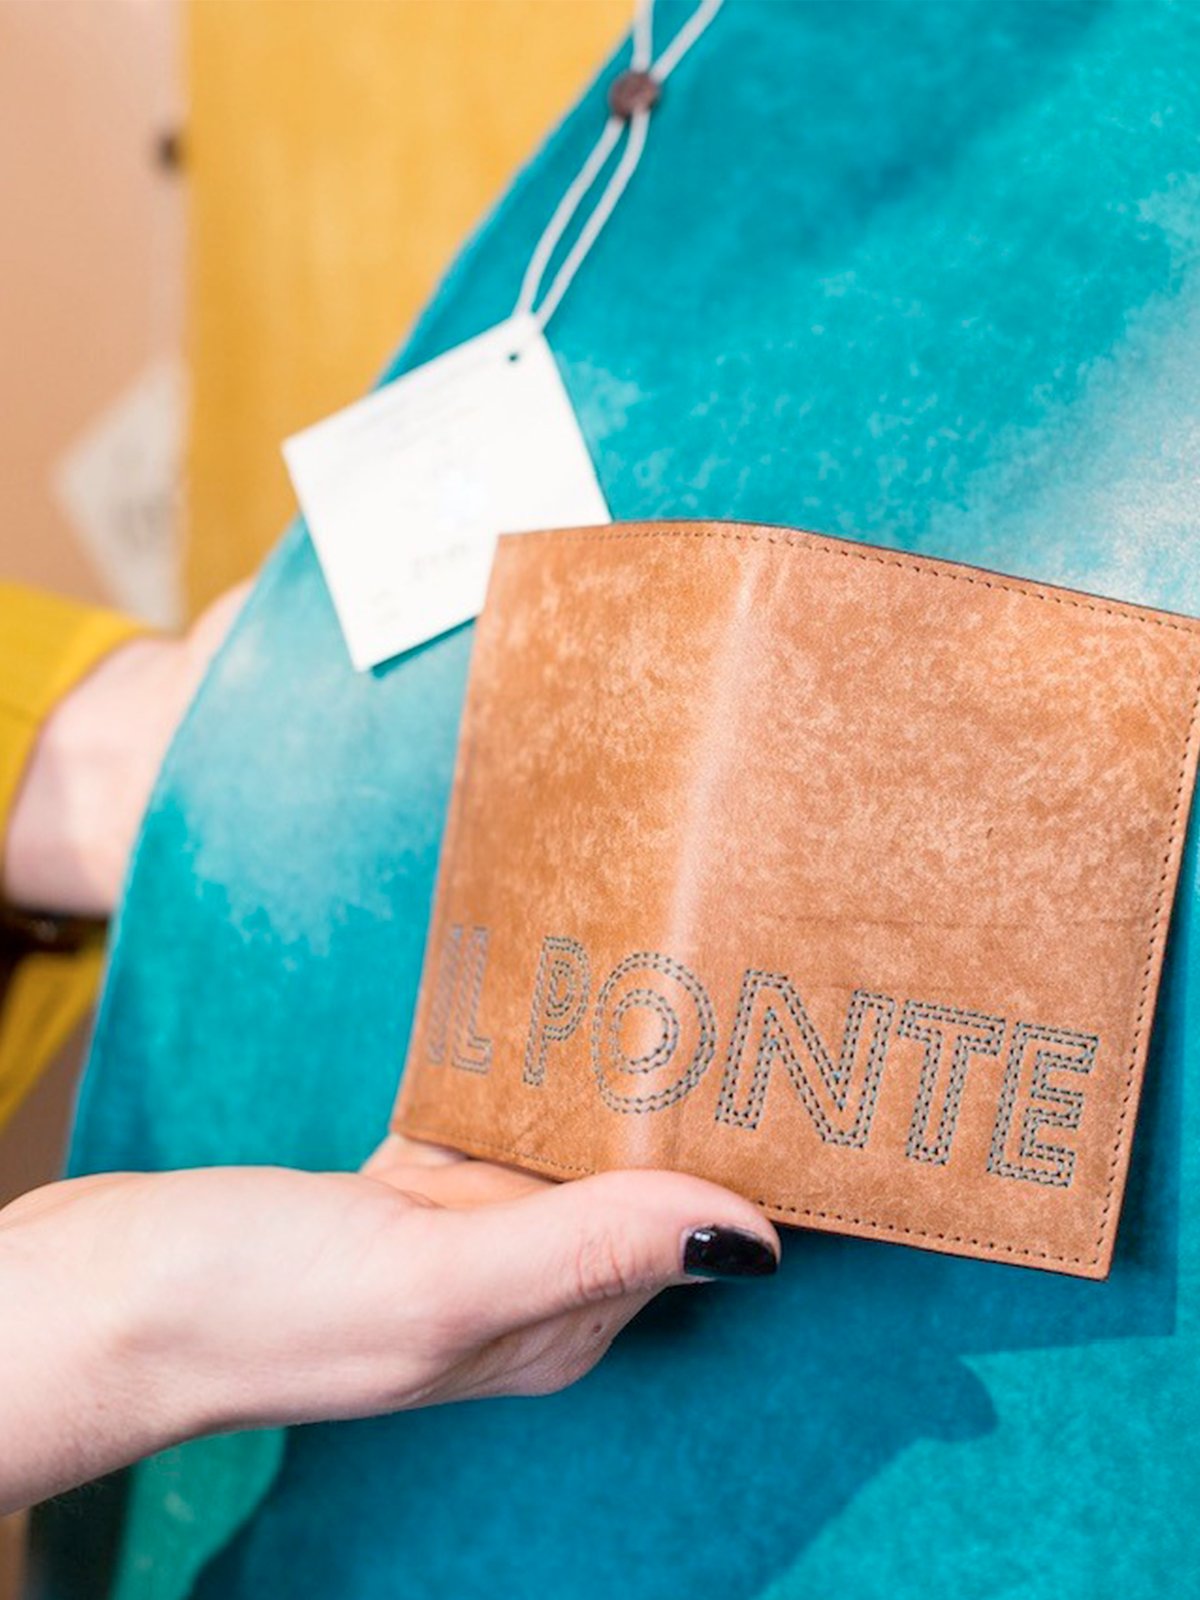 Tannery Il Ponte opens the doors of its new showroom and enters new markets